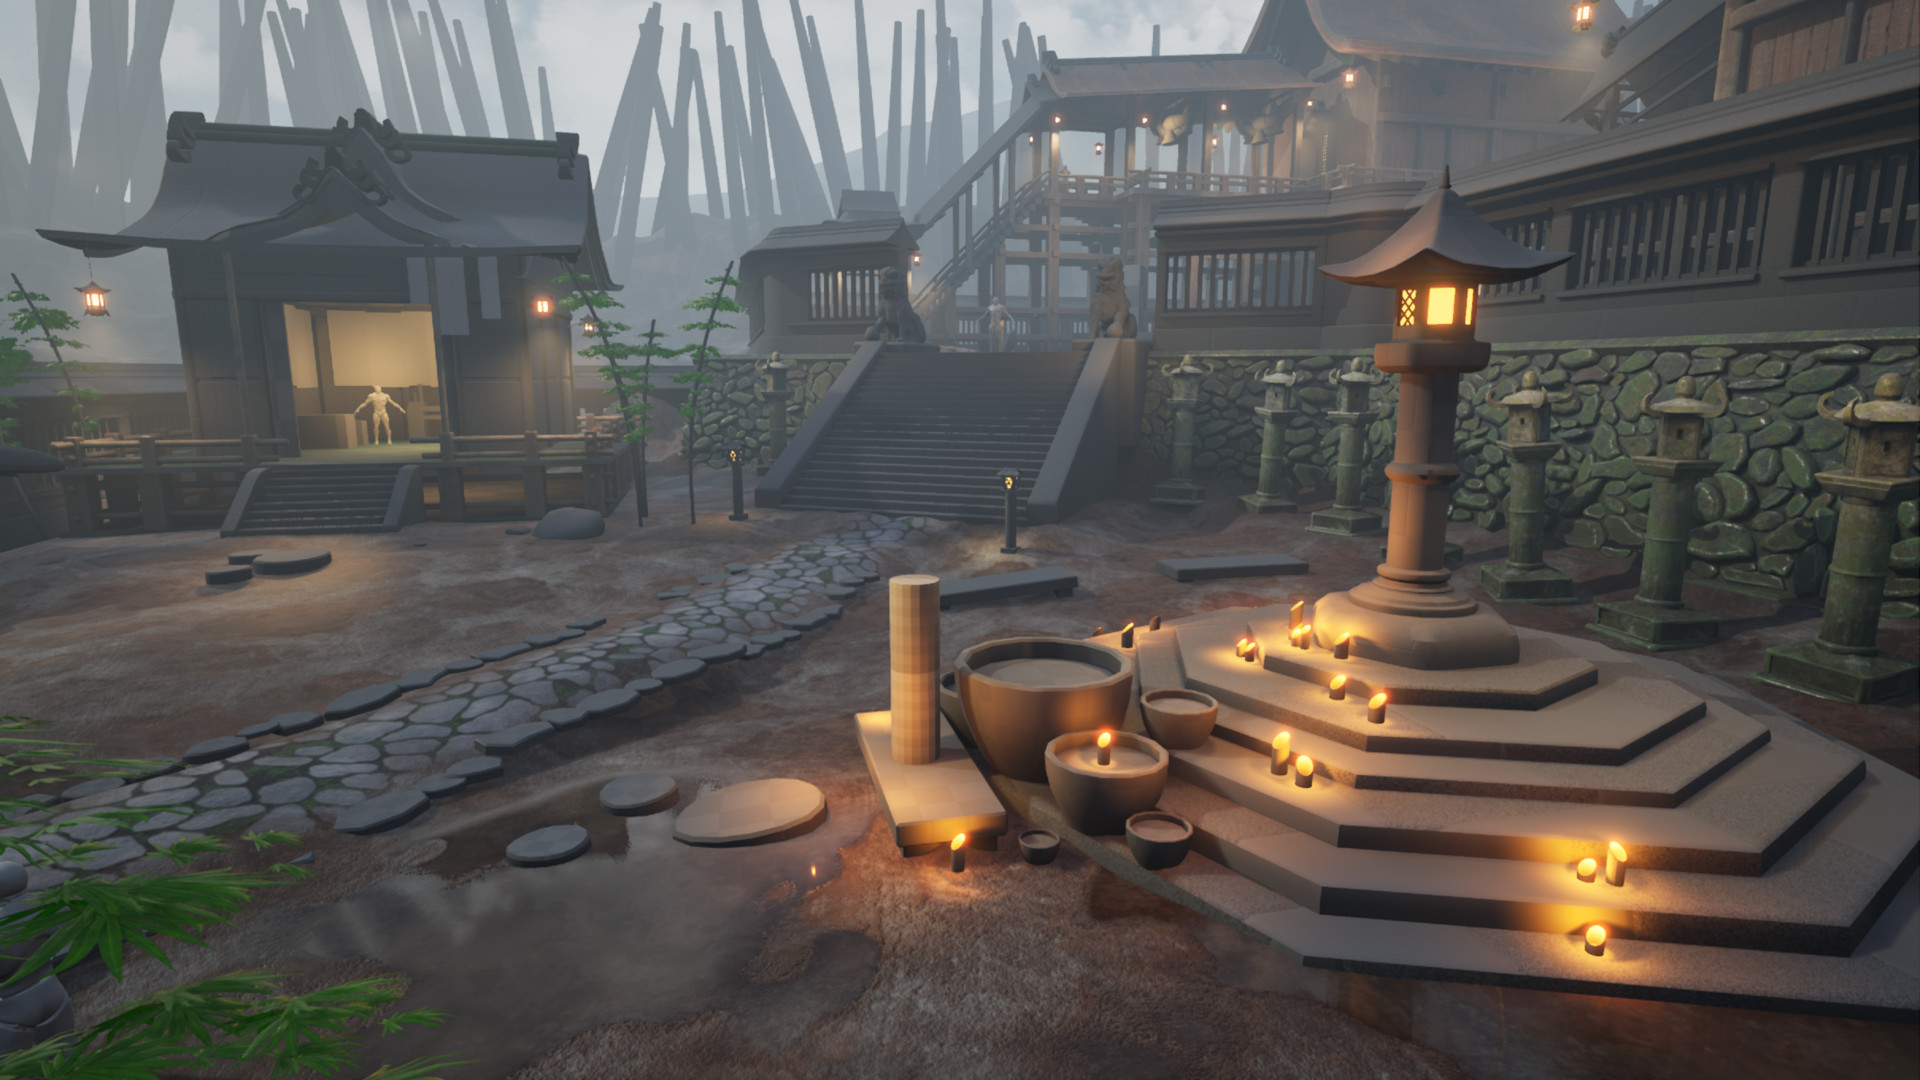 Unreal 4 screenshot showing the shrine to the right. A little calligrapher’s hut to the left. On the right side, behind the shrine, there is lime-stone green, cobbled walls.